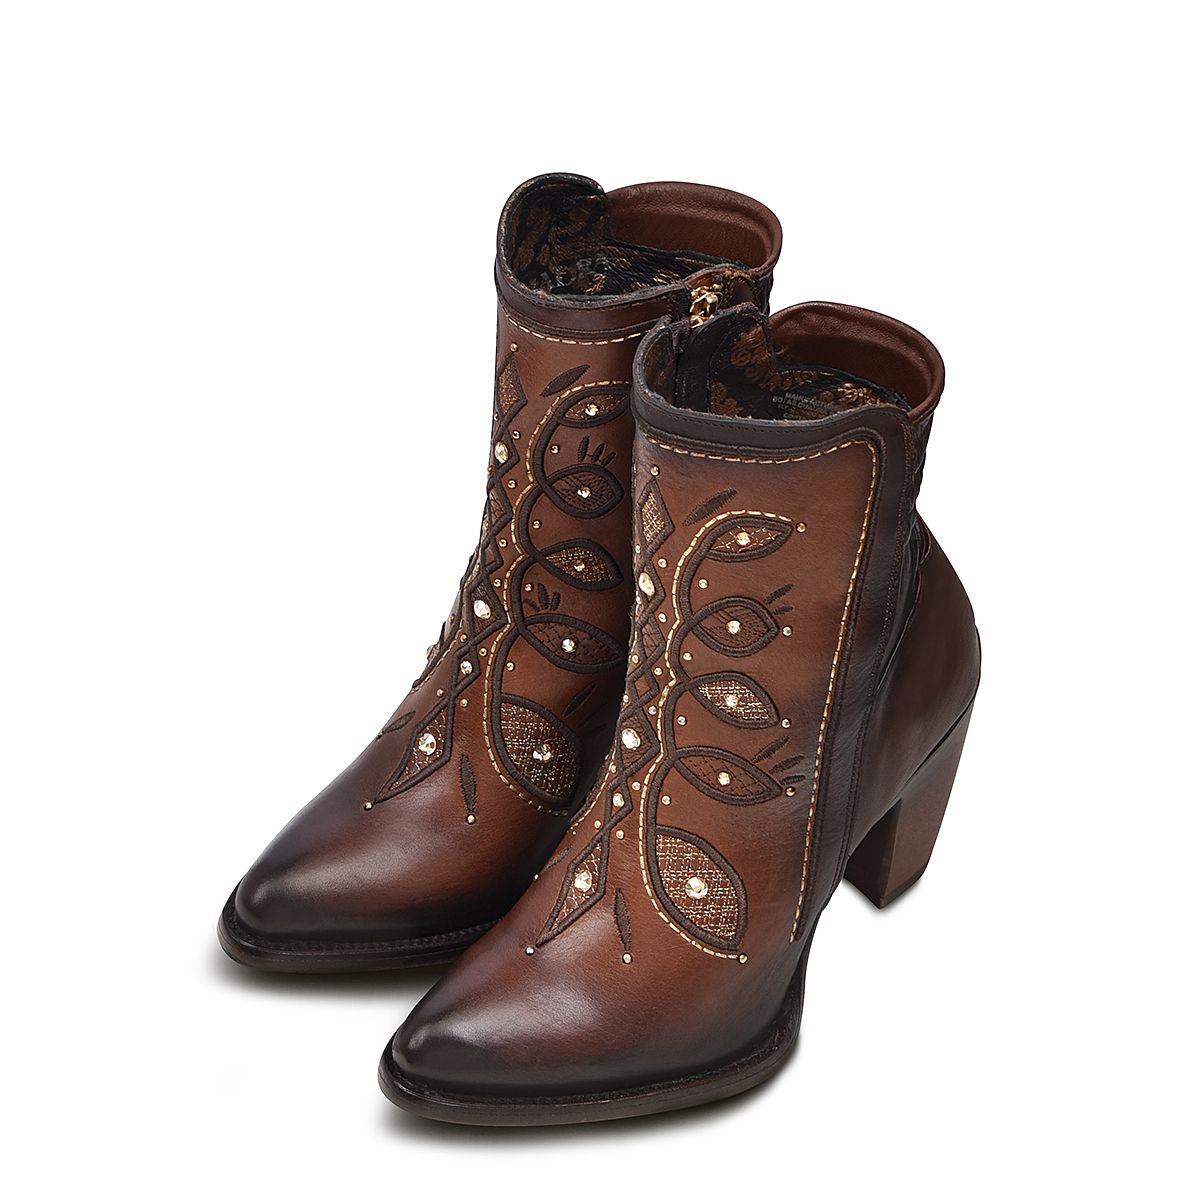 3F89RS - Cuadra brown western cowgirl cowhide leather ankle boots for women-Kuet.us